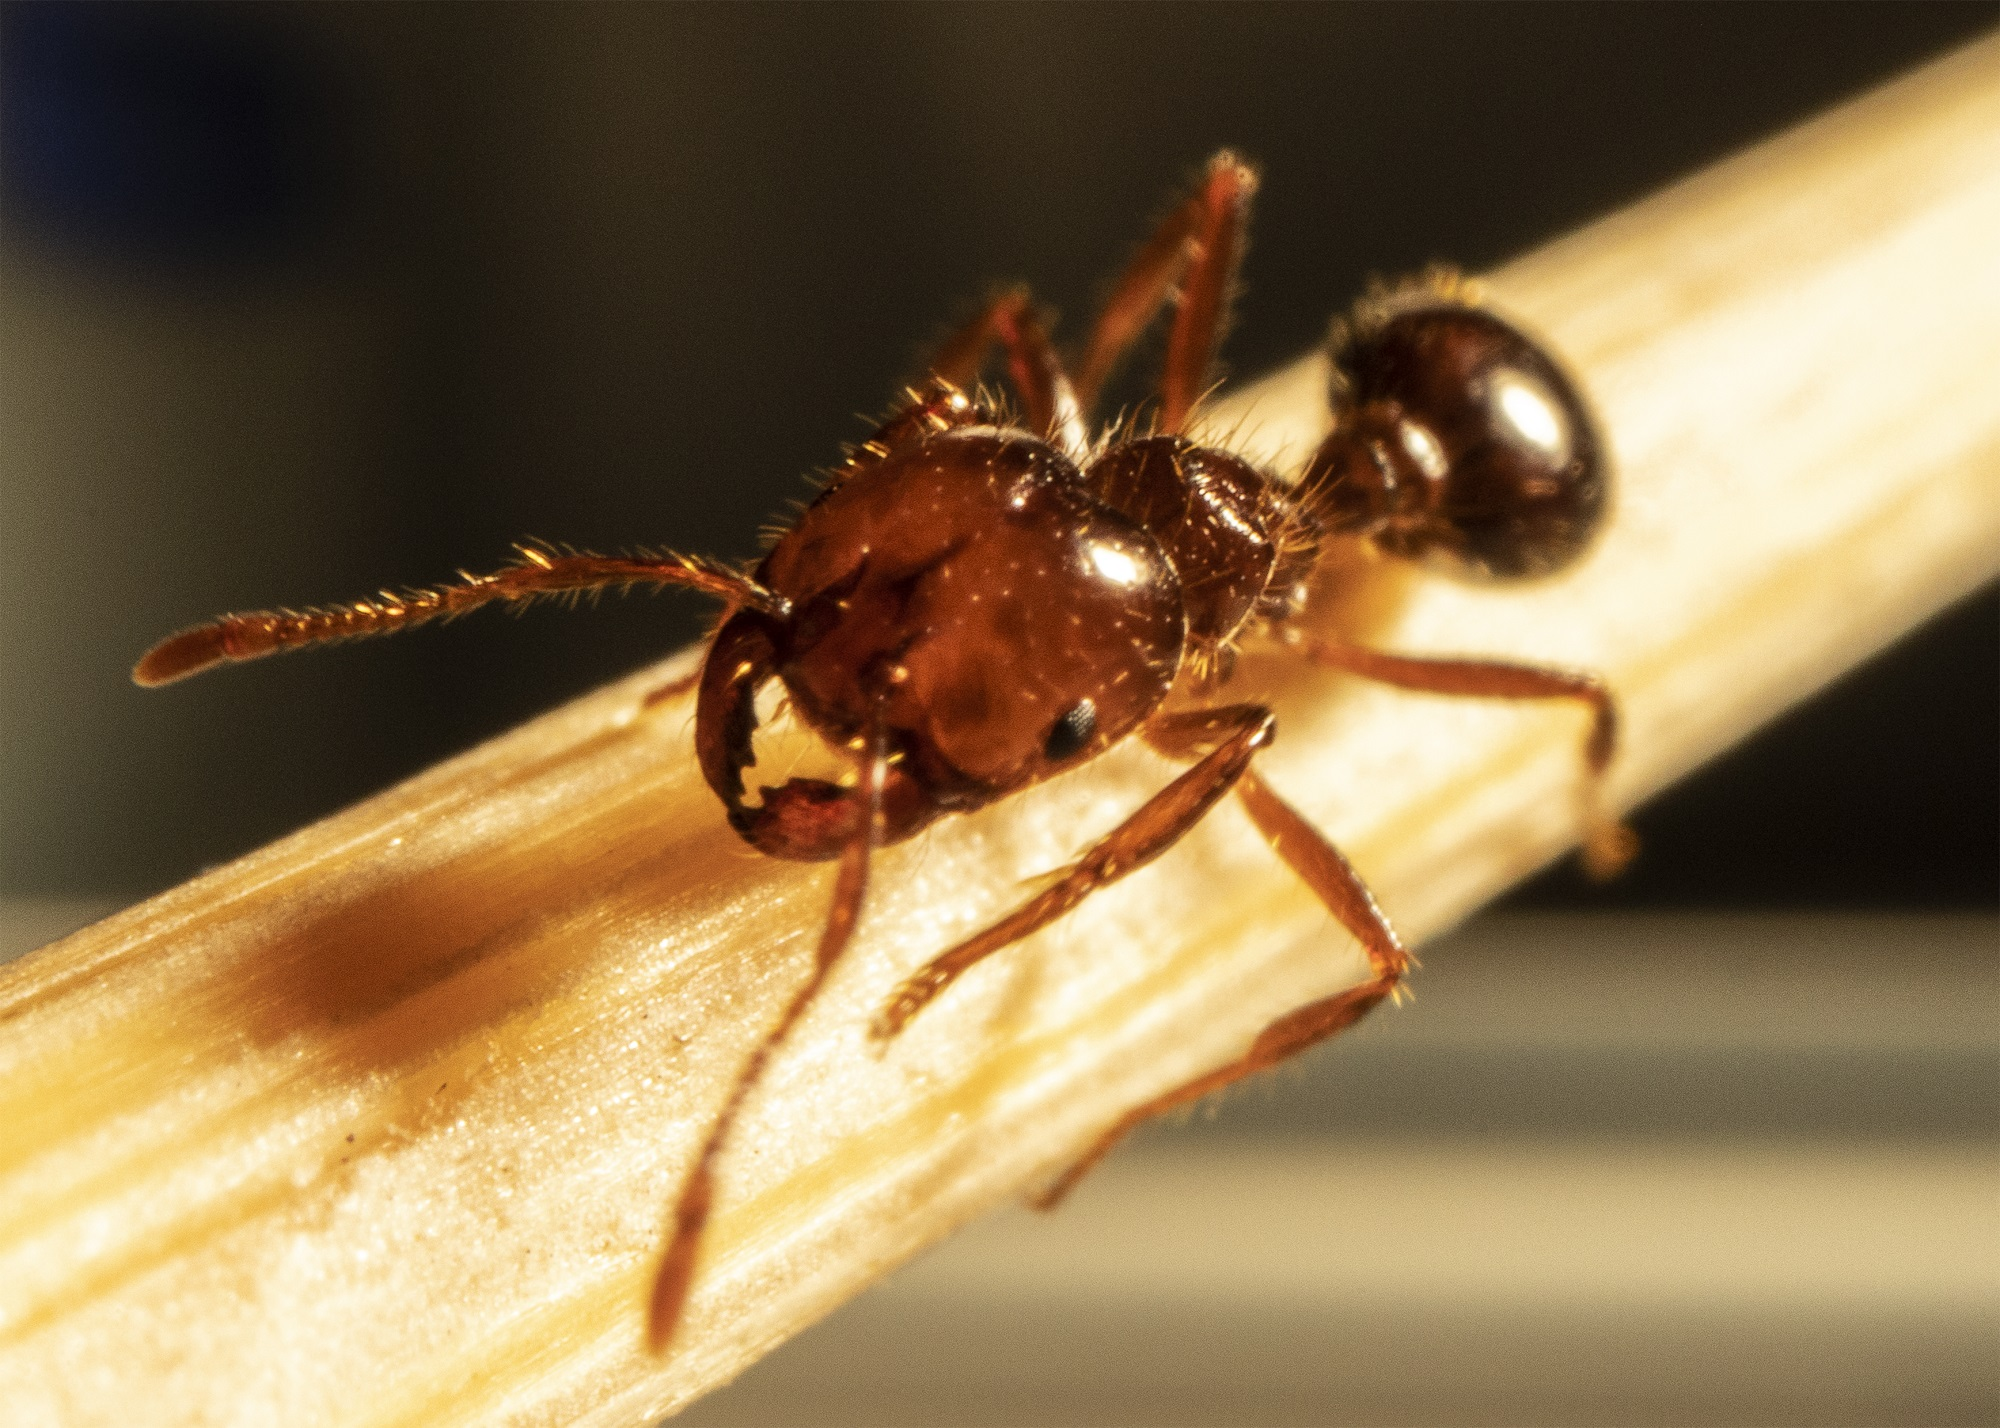 Community support needed to stop fire ants